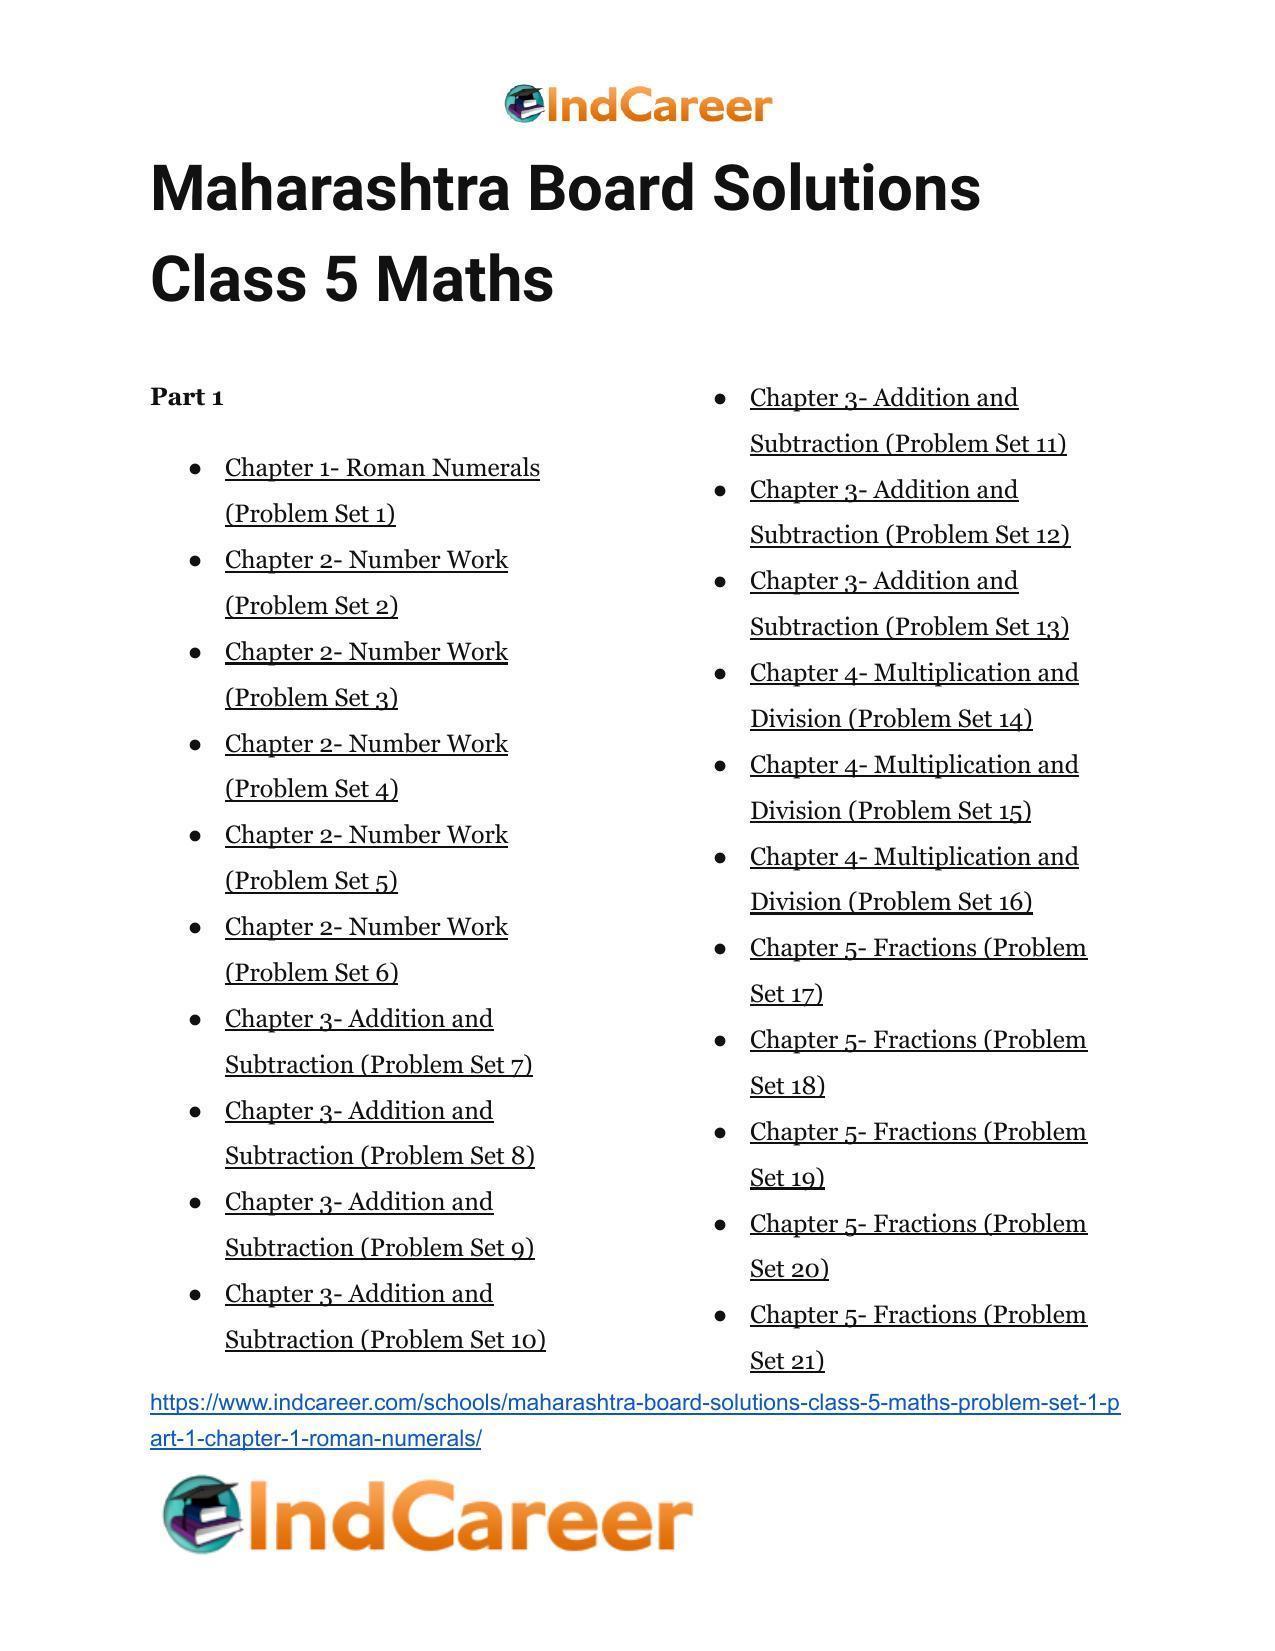 Maharashtra Board Solutions Class 5-Maths (Problem Set 1) - Part 1: Chapter 1- Roman Numerals - Page 15